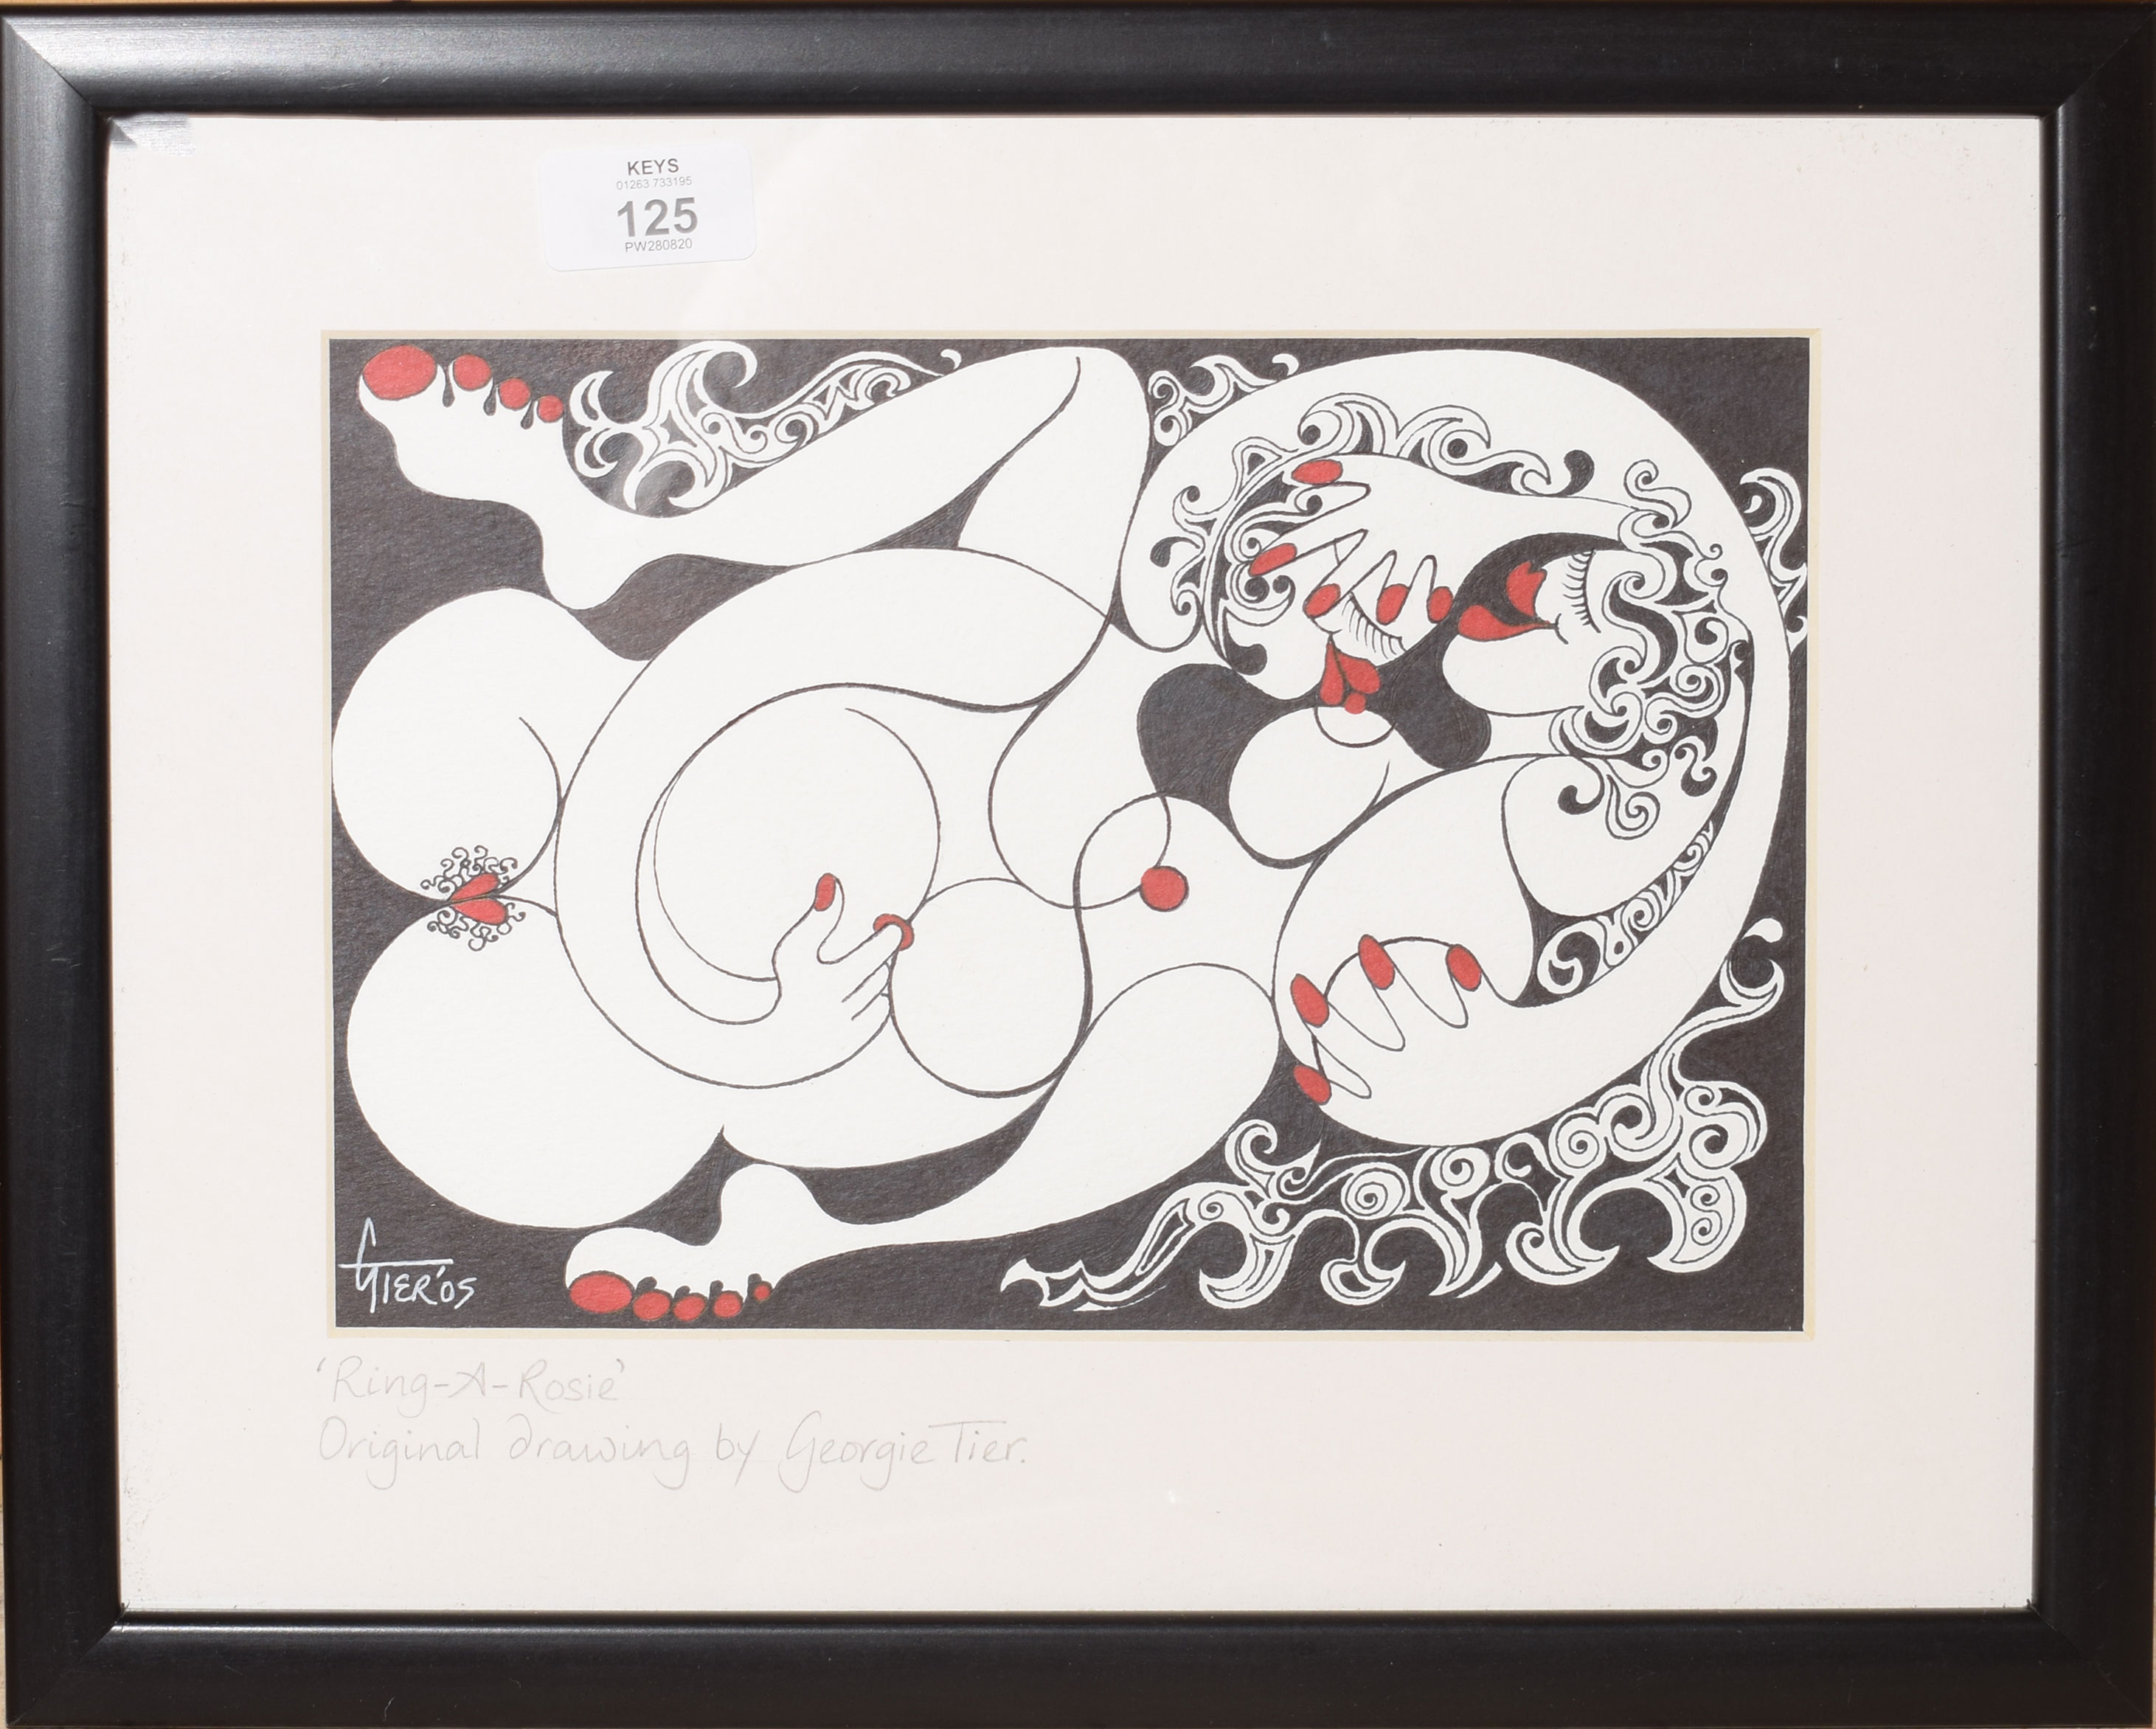 George Tier, "Ring-a-Rosie", original drawing, signed and dated 05 lower left, 18 x 26cm